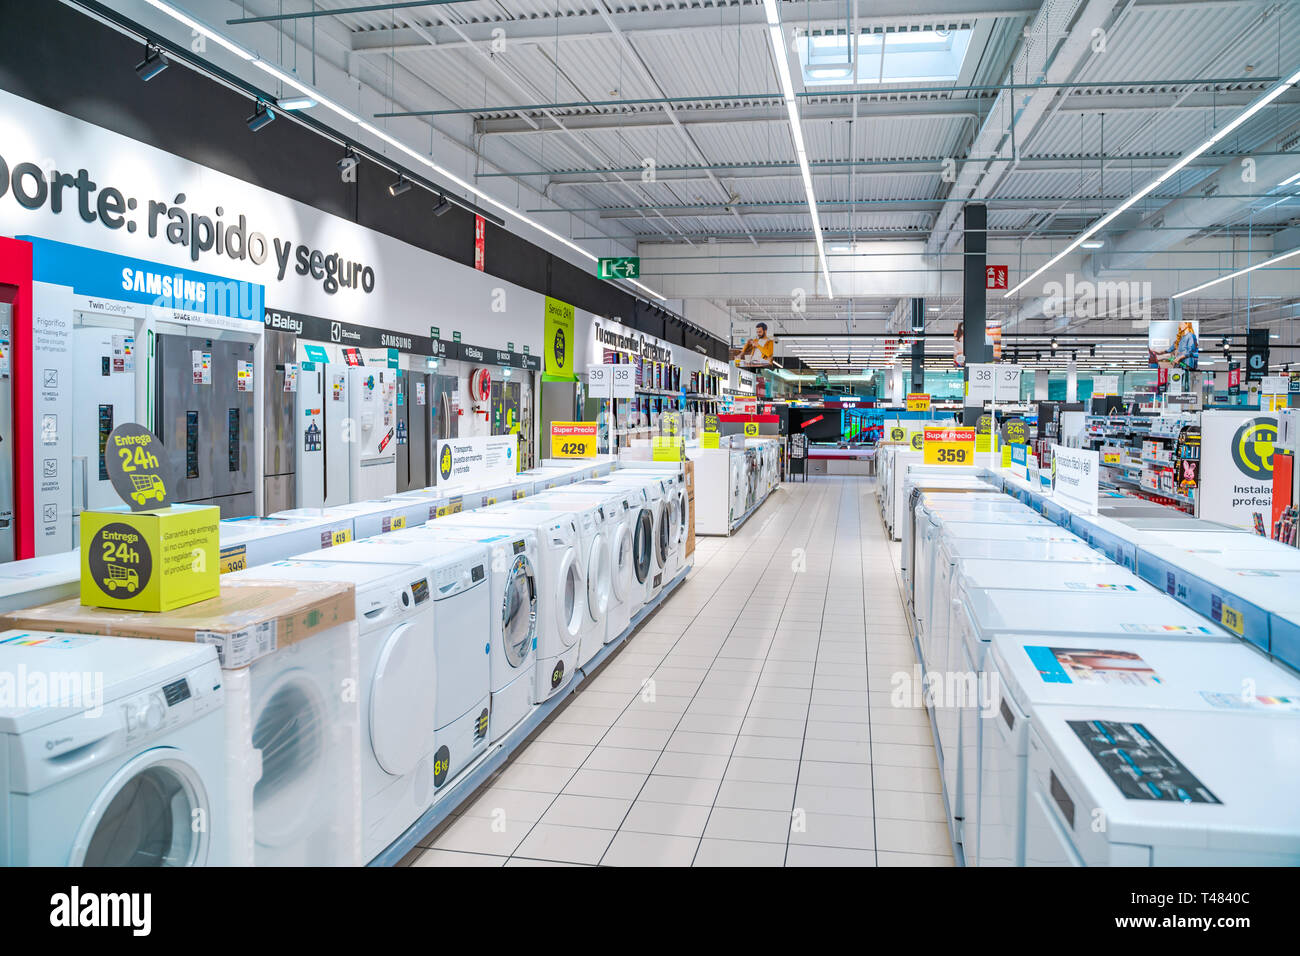 Valencia,Spain - April 03, 2019: Washing Machines, drying  machines,household appliances department. Carrefour supermarket Stock Photo  - Alamy